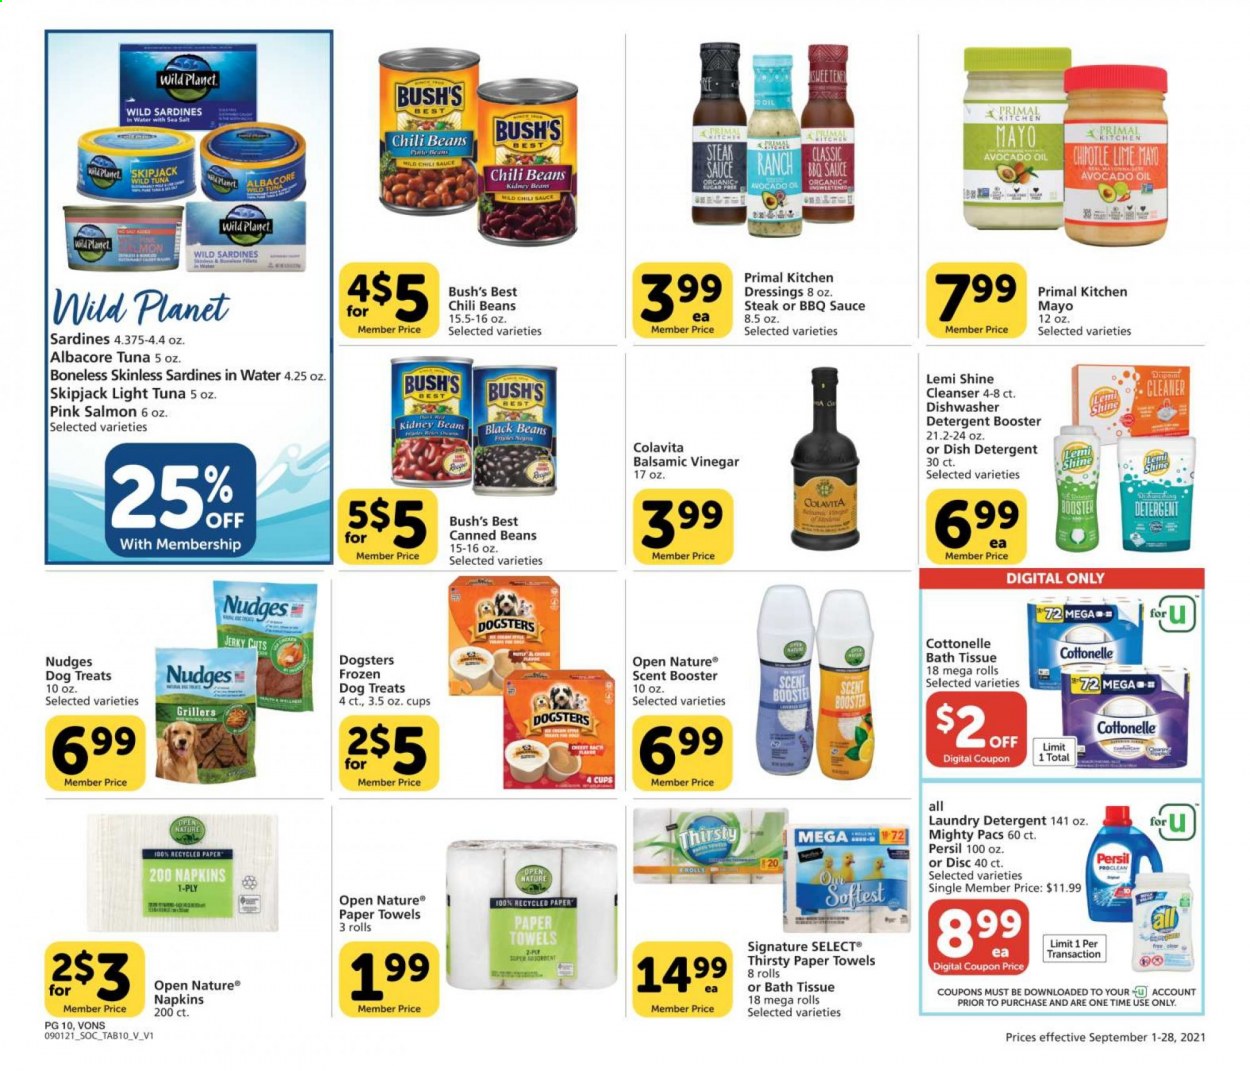 thumbnail - Vons Flyer - 09/01/2021 - 09/28/2021 - Sales products - beans, steak, salmon, sardines, tuna, sauce, jerky, mayonnaise, black beans, kidney beans, chili beans, light tuna, BBQ sauce, chilli sauce, avocado oil, balsamic vinegar, vinegar, oil, napkins, bath tissue, Cottonelle, kitchen towels, paper towels, detergent, cleaner, Persil, laundry detergent, cleanser, cup. Page 10.